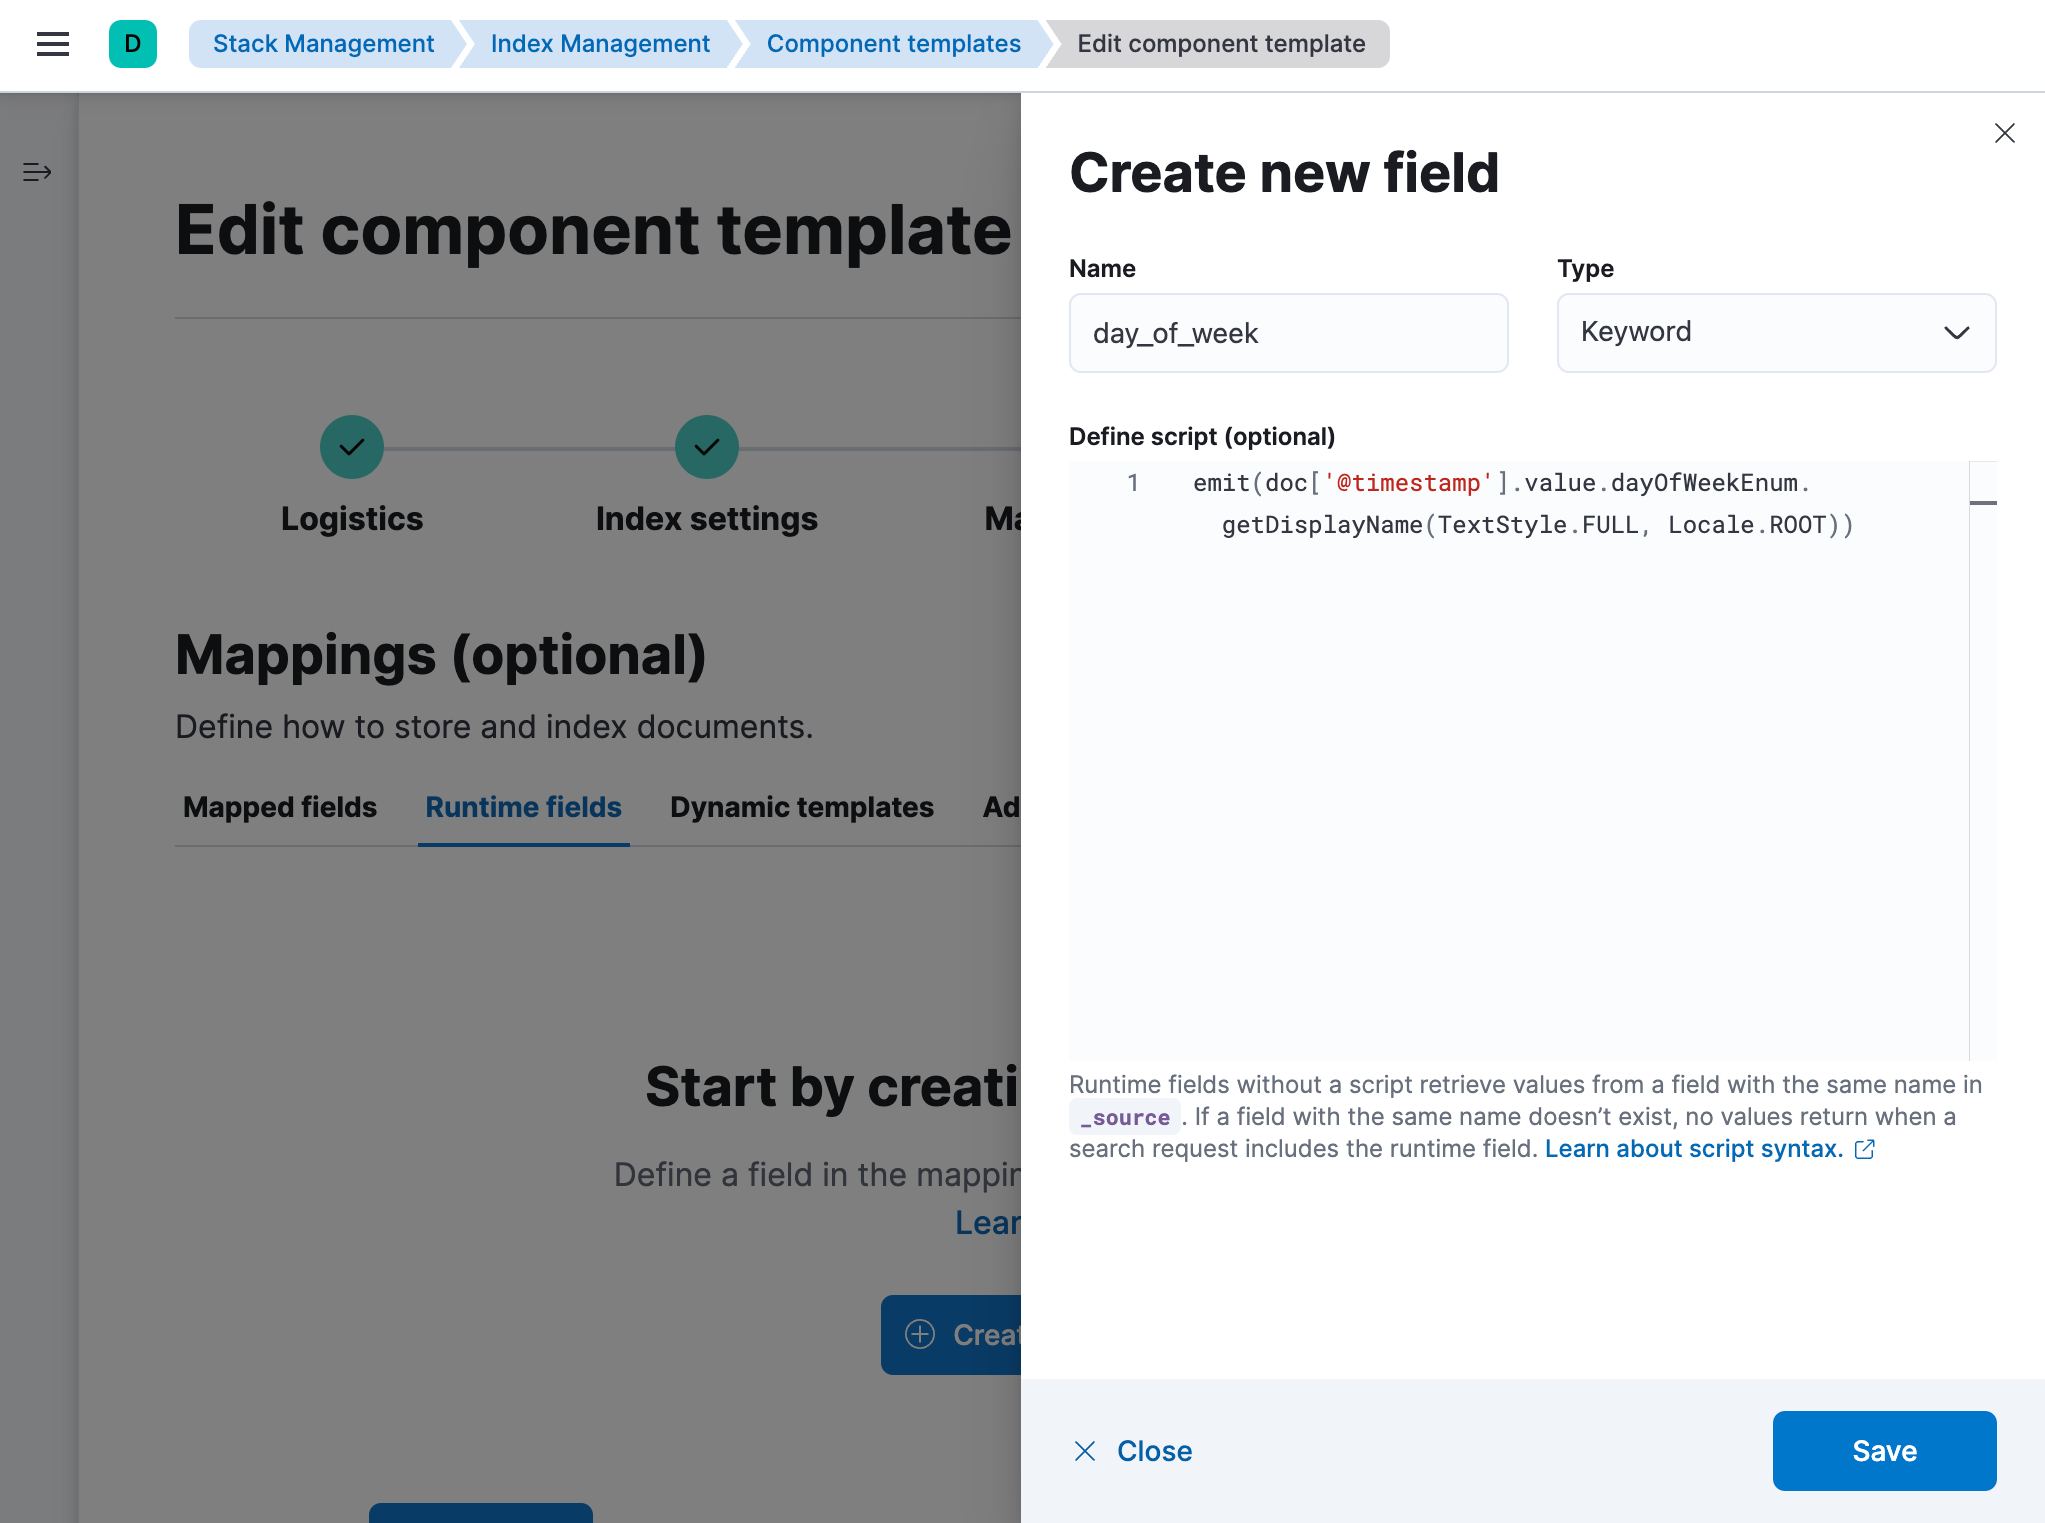 Editing a component template to add a new runtime field